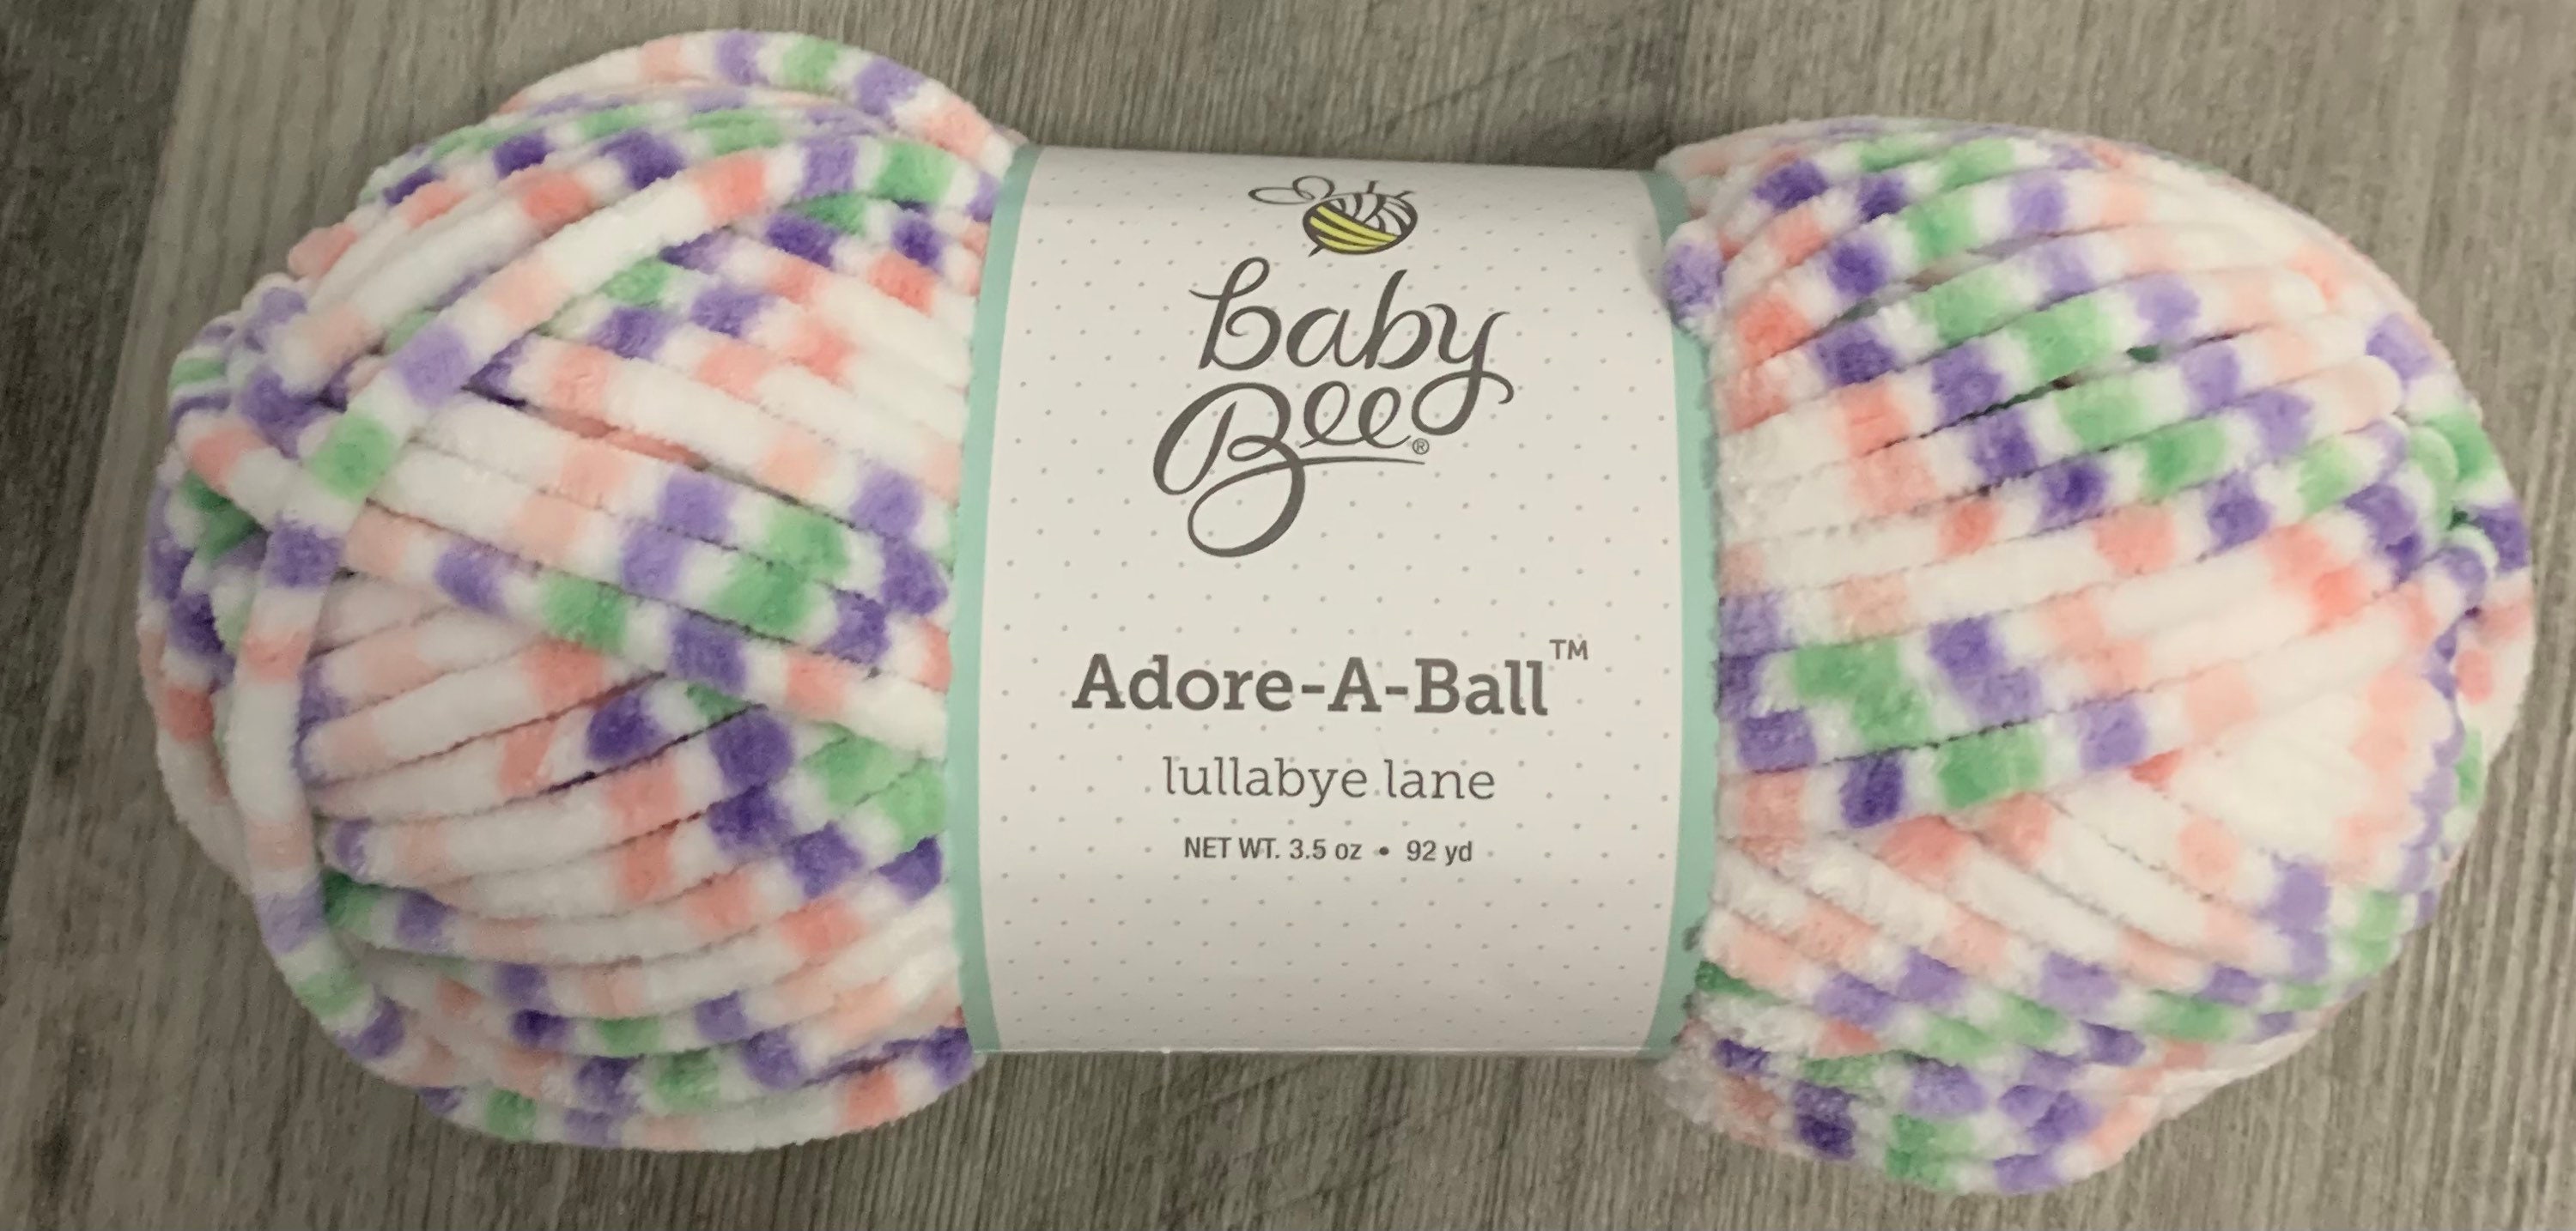 1 Skein 8 Skeins Available in 2 Colors Baby Bee Adore-a-ball Yarn,  3.5oz/100g, 92y/85m, 5 Bulky 